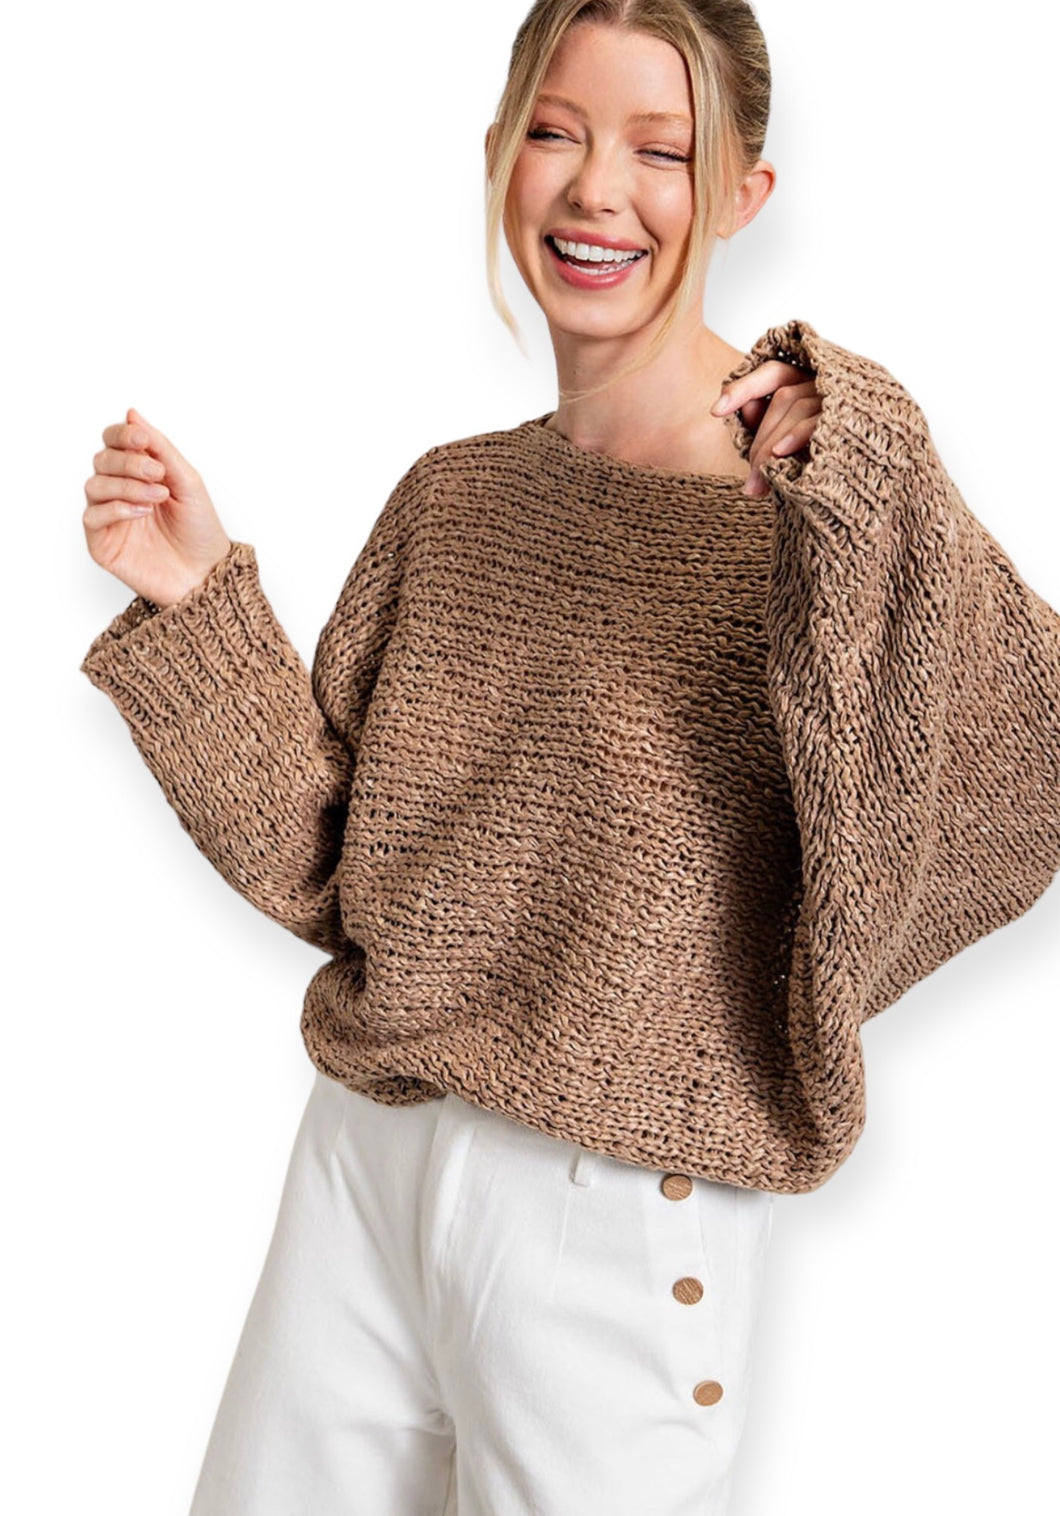 Lily's Loose Fit Knit Sweater Top- Mocha